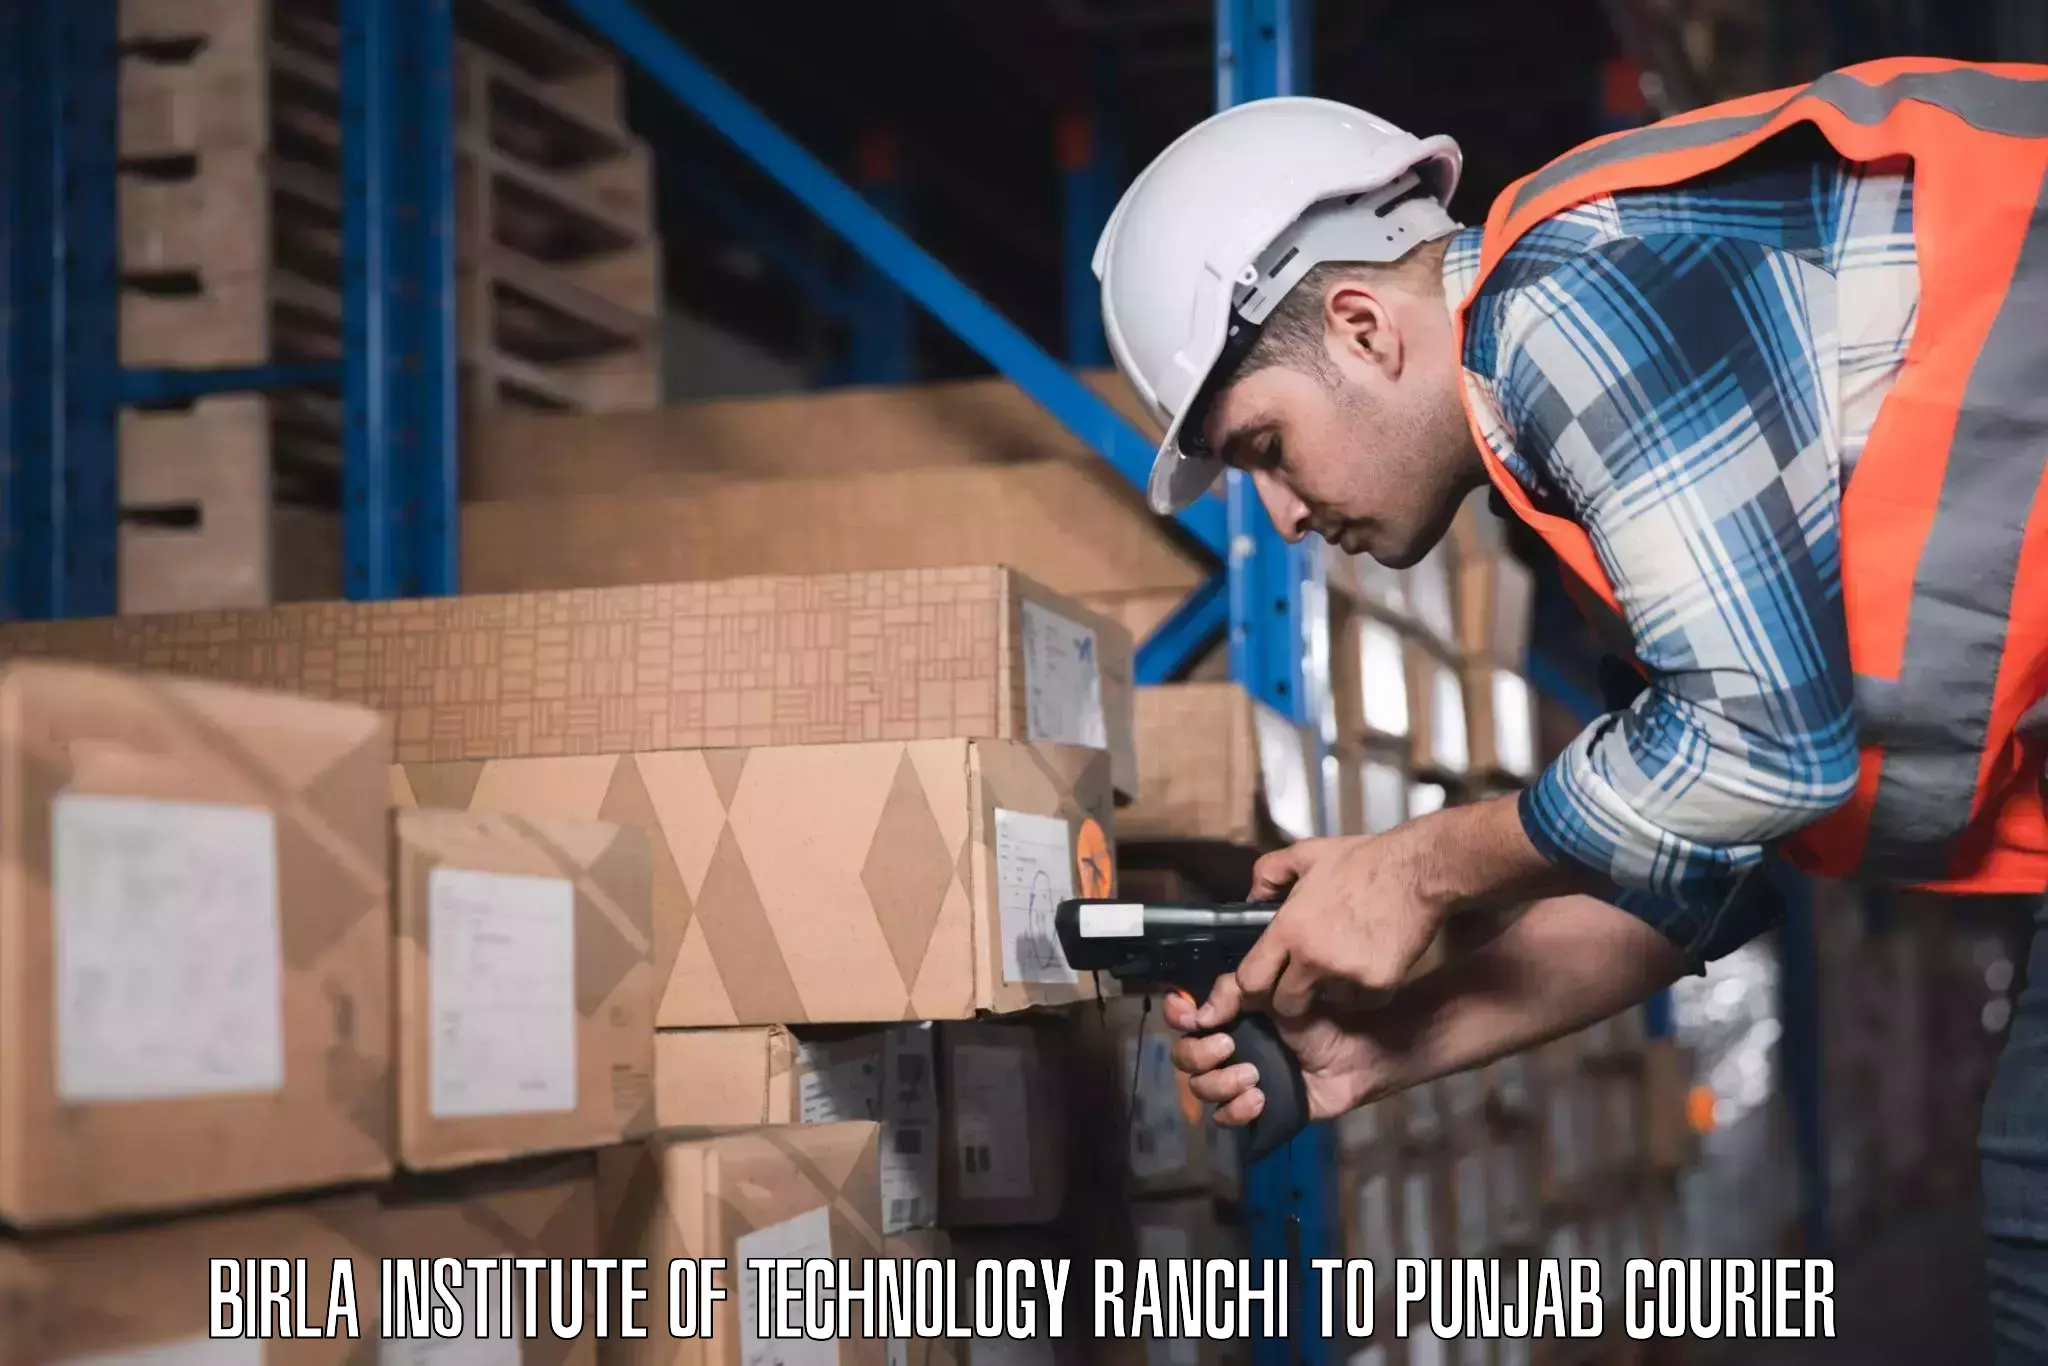 Luggage delivery system Birla Institute of Technology Ranchi to Tarsikka